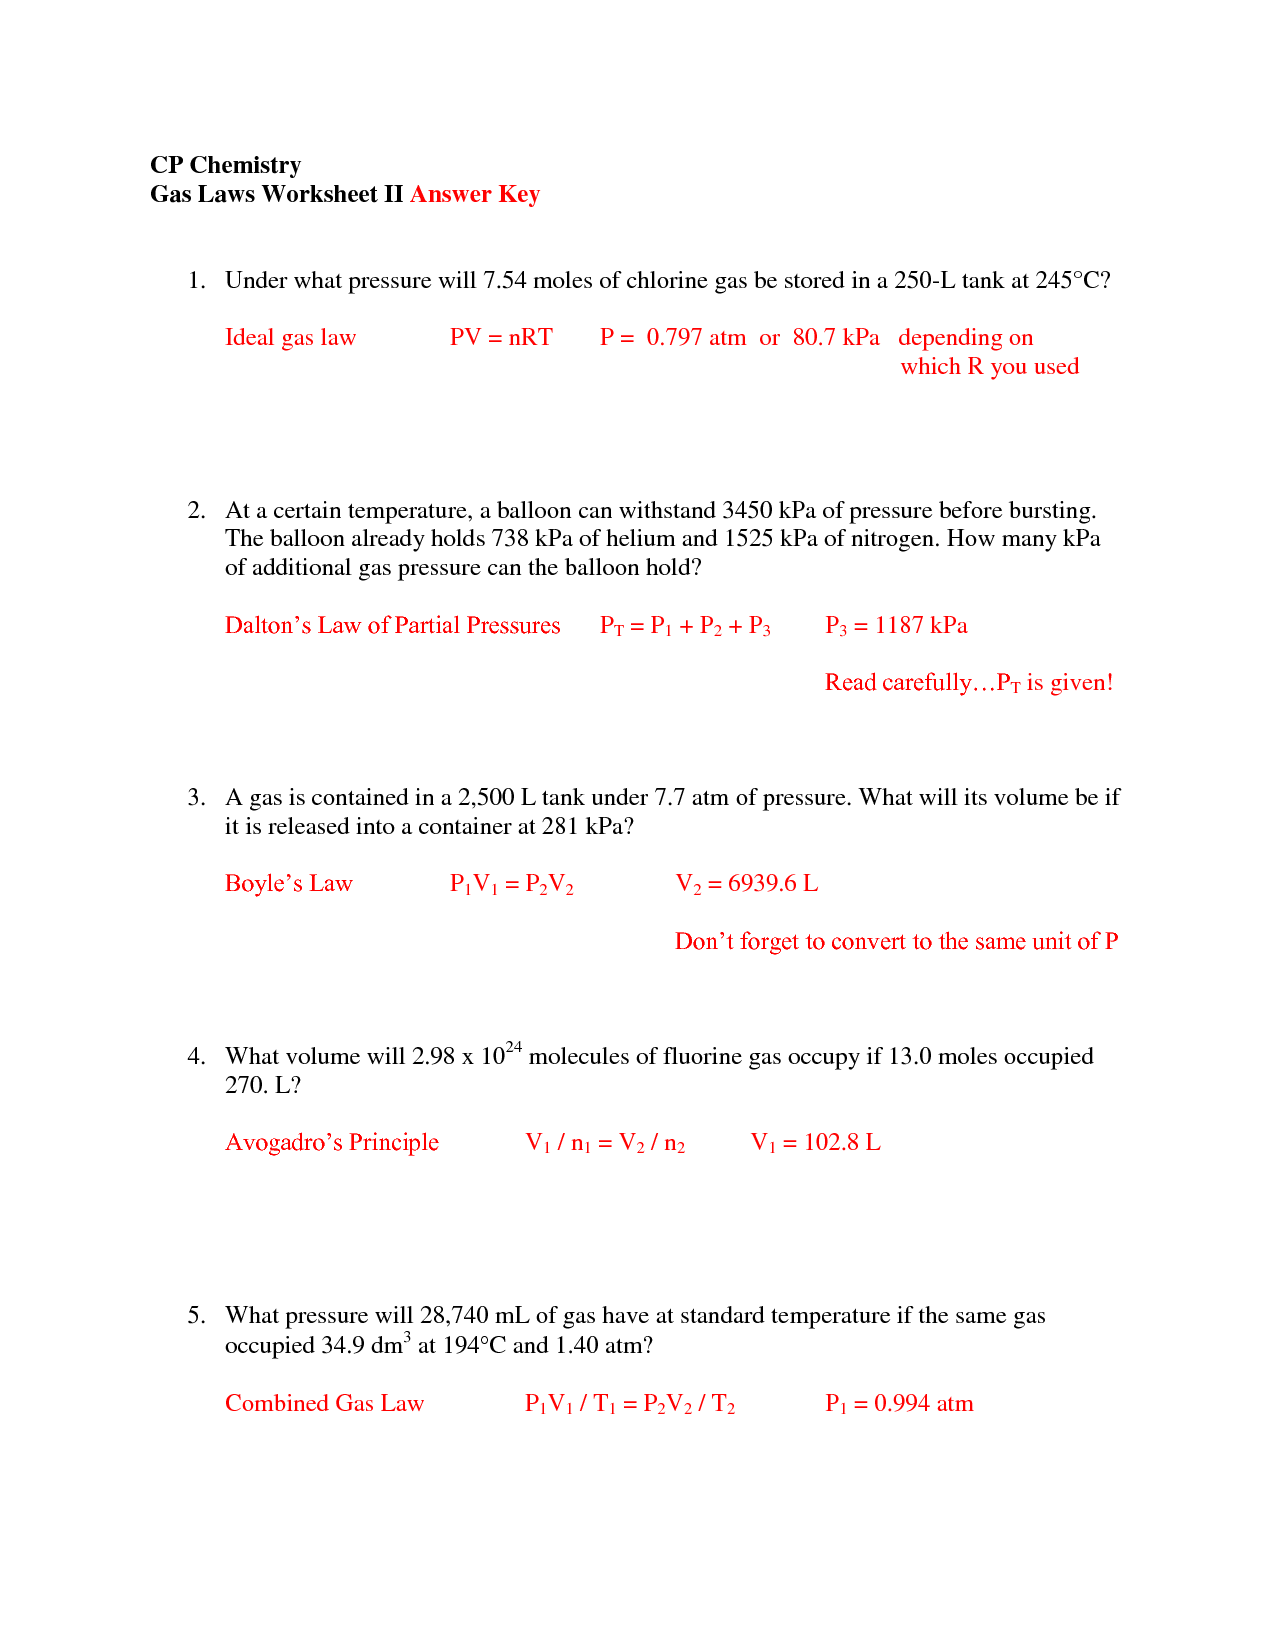 Chemistry Combined Gas Law Worksheet Answers